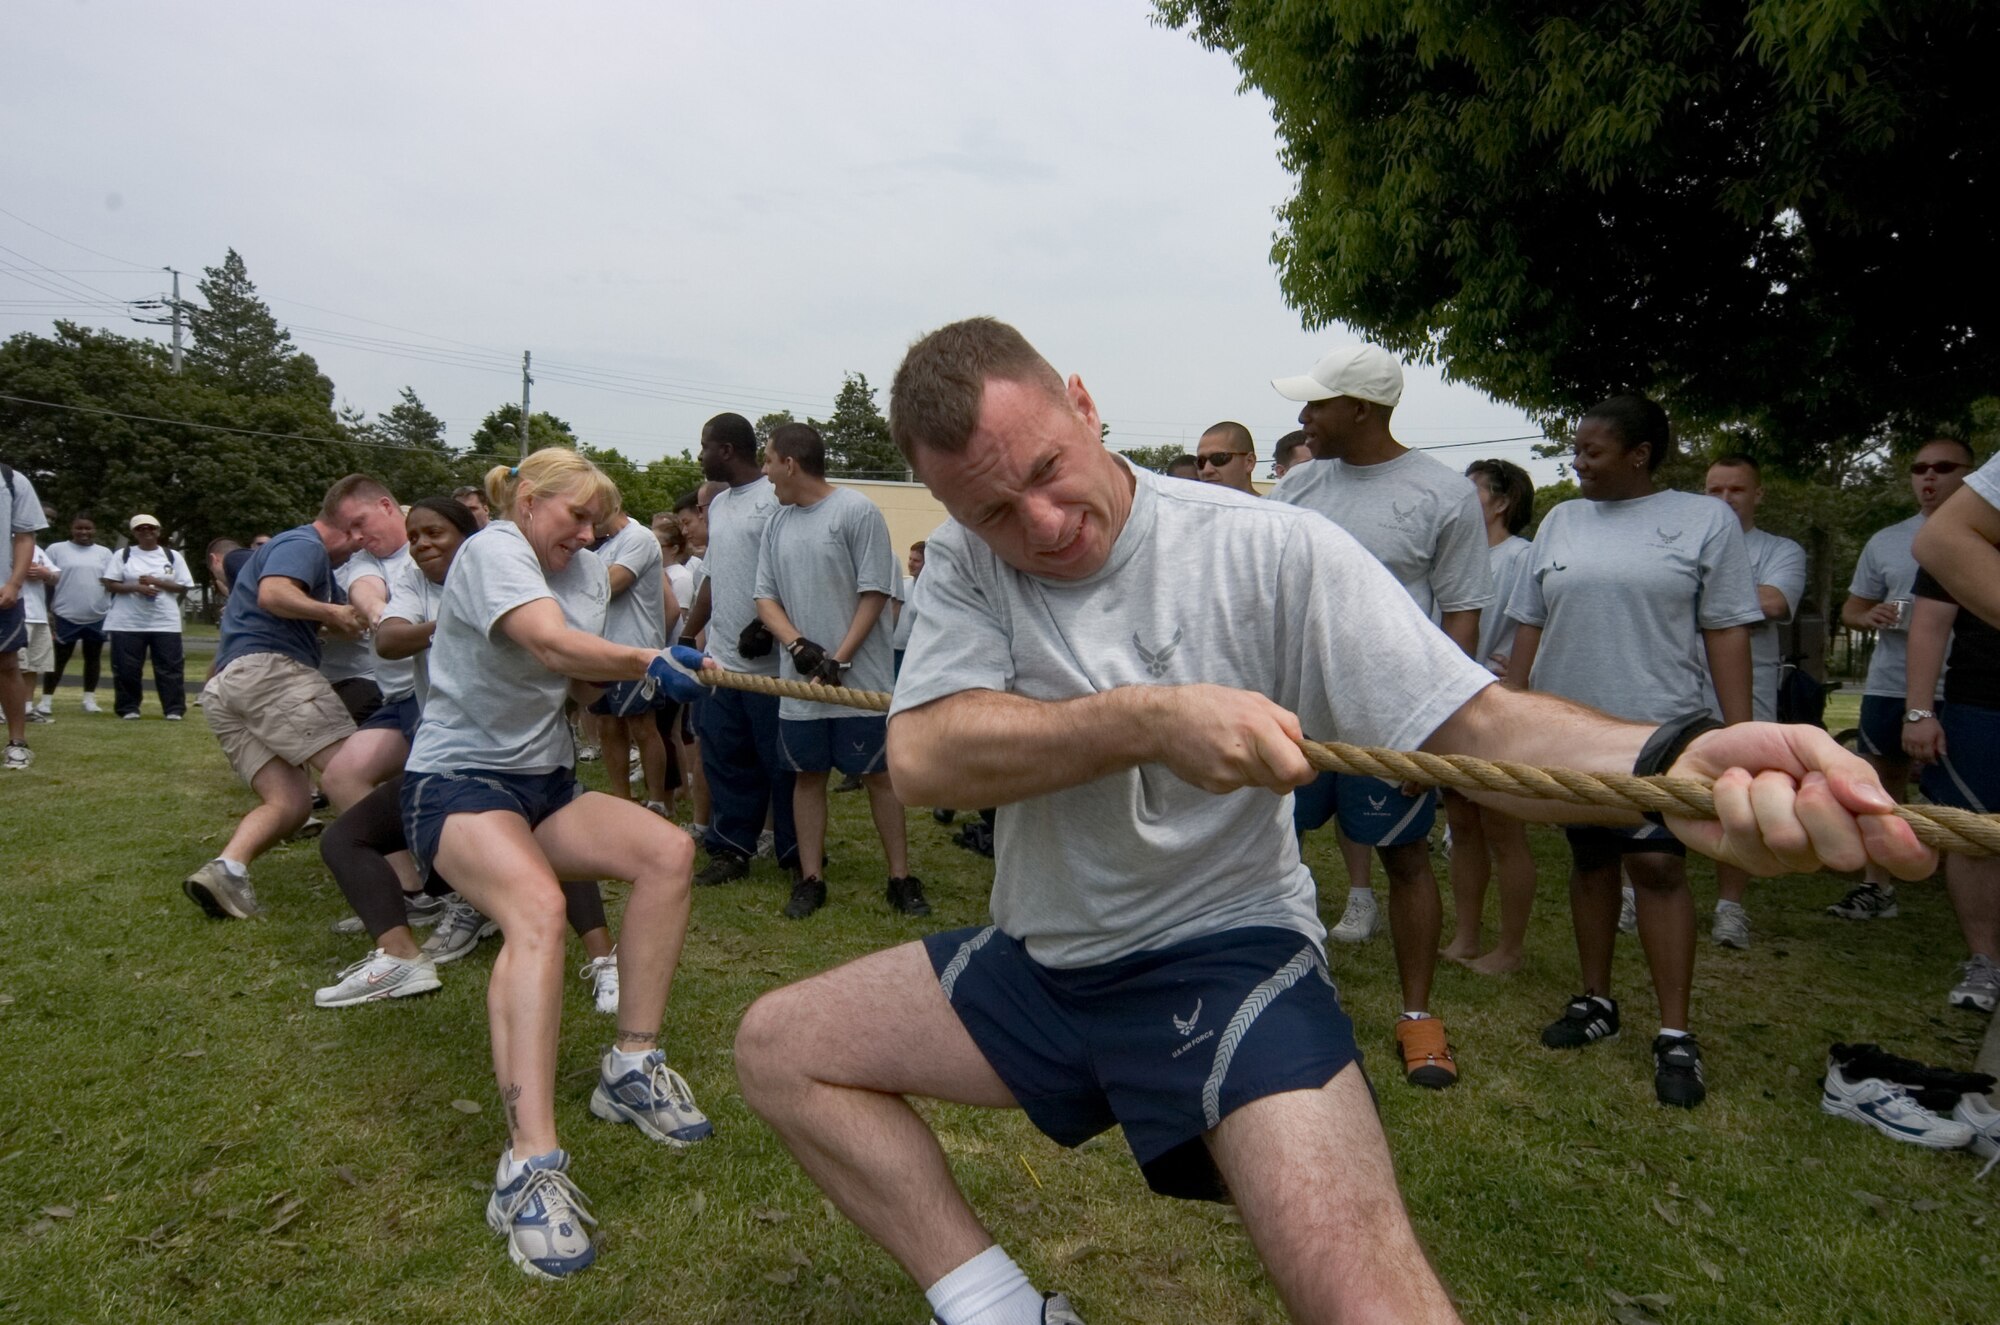 Squadrons participate in the Tug-of-War competition during the Wing Sports and Safety Day May 18. (U.S. Air Force photo by Master Sgt. Nelson James VIRIN 070518-F-5809J-178